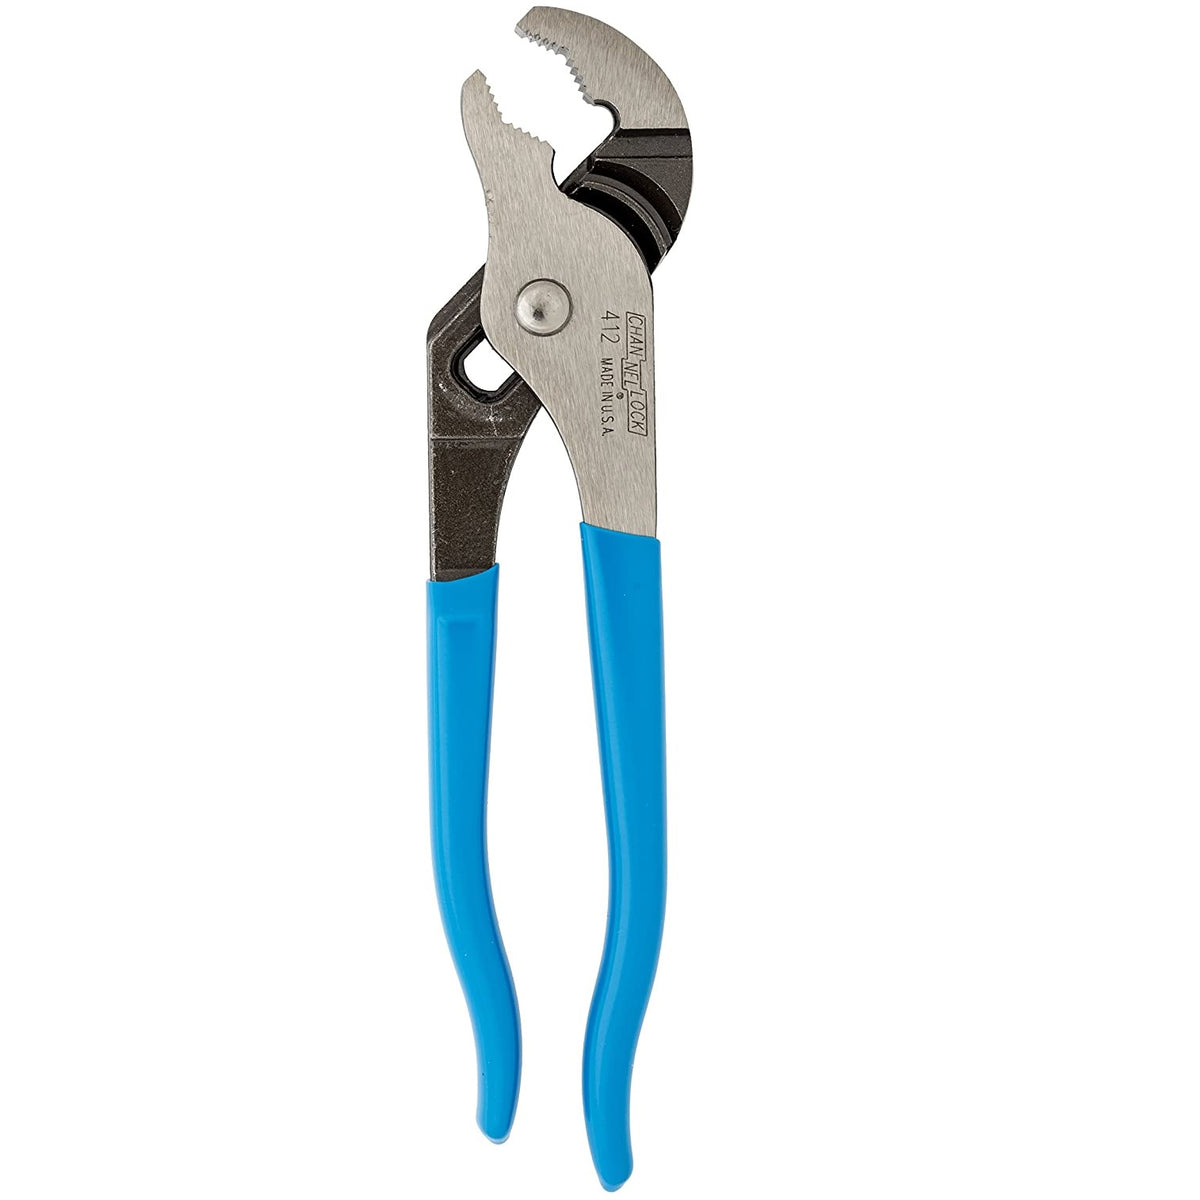 Channellock 412 V-Jaw Tongue and Groove Pliers, Blue